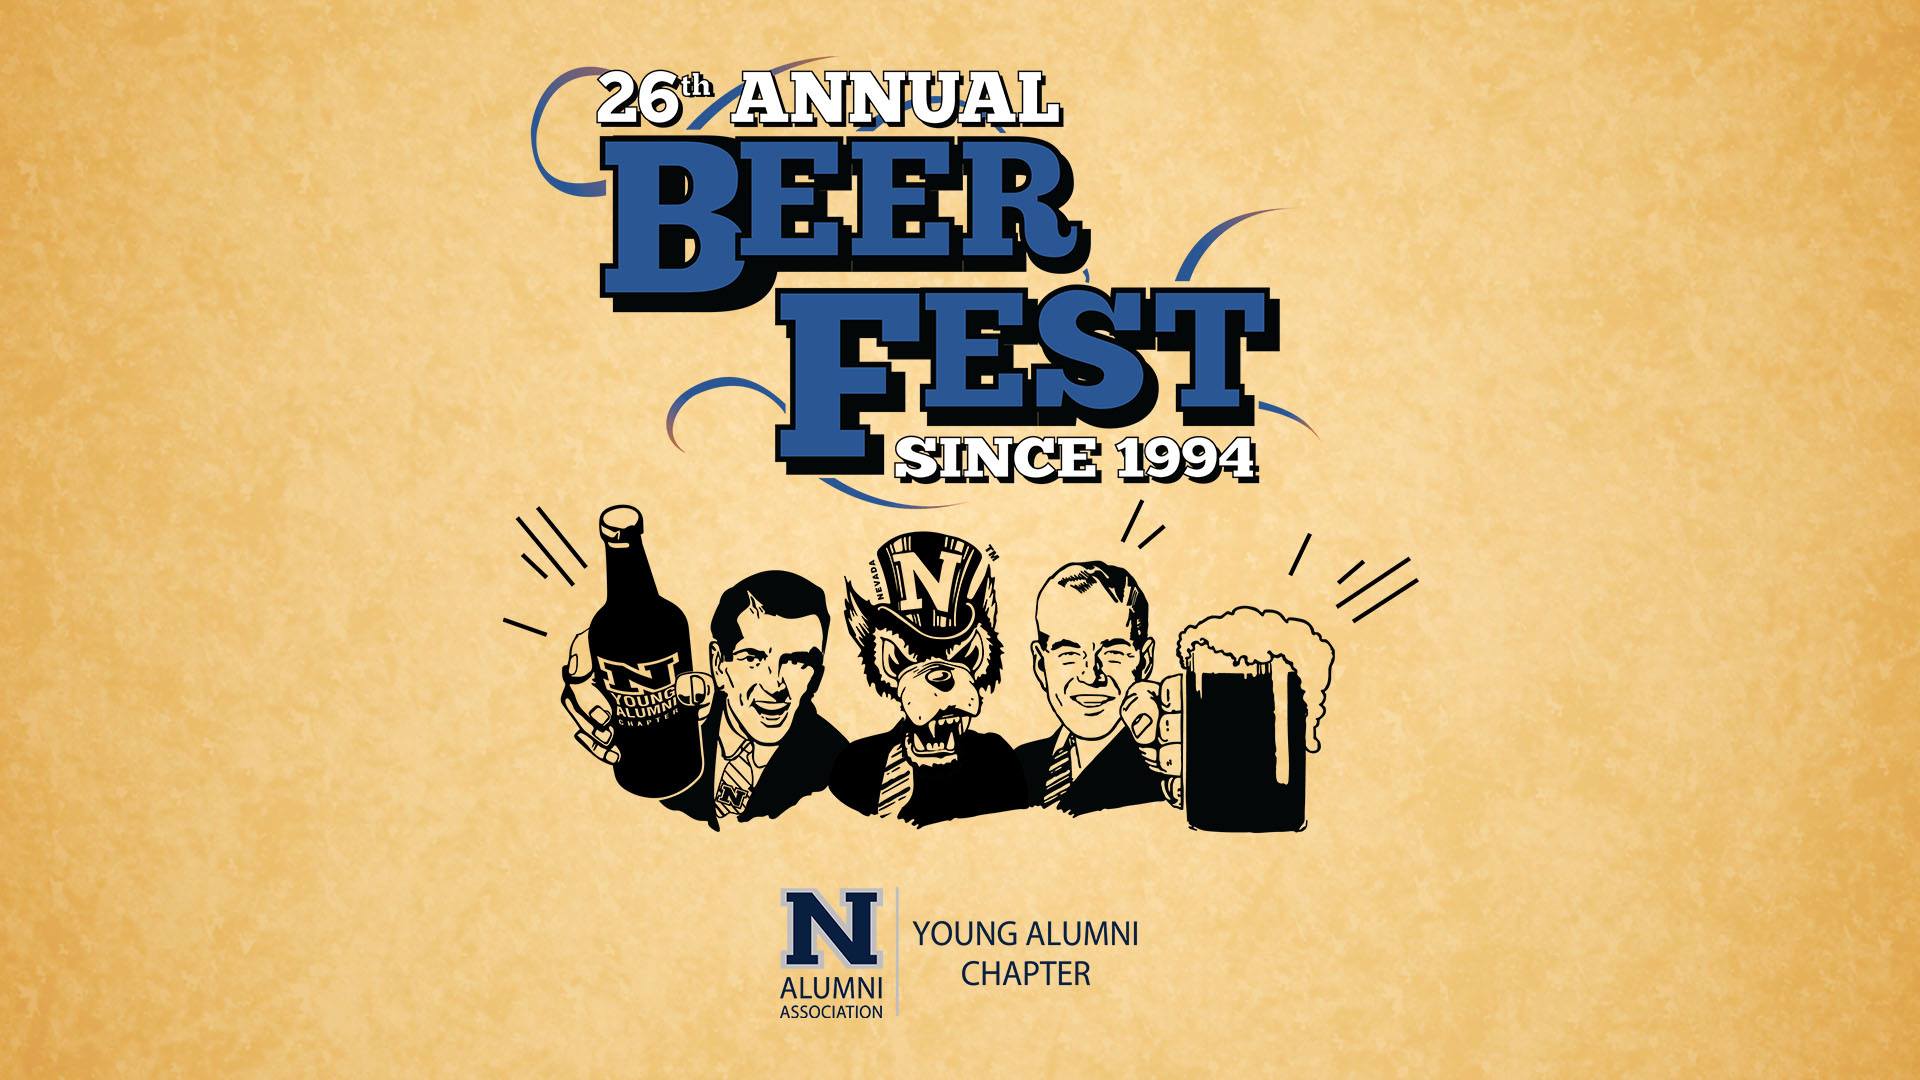 26th Annual Beer Fest Reno Sparks Events Nevada Events